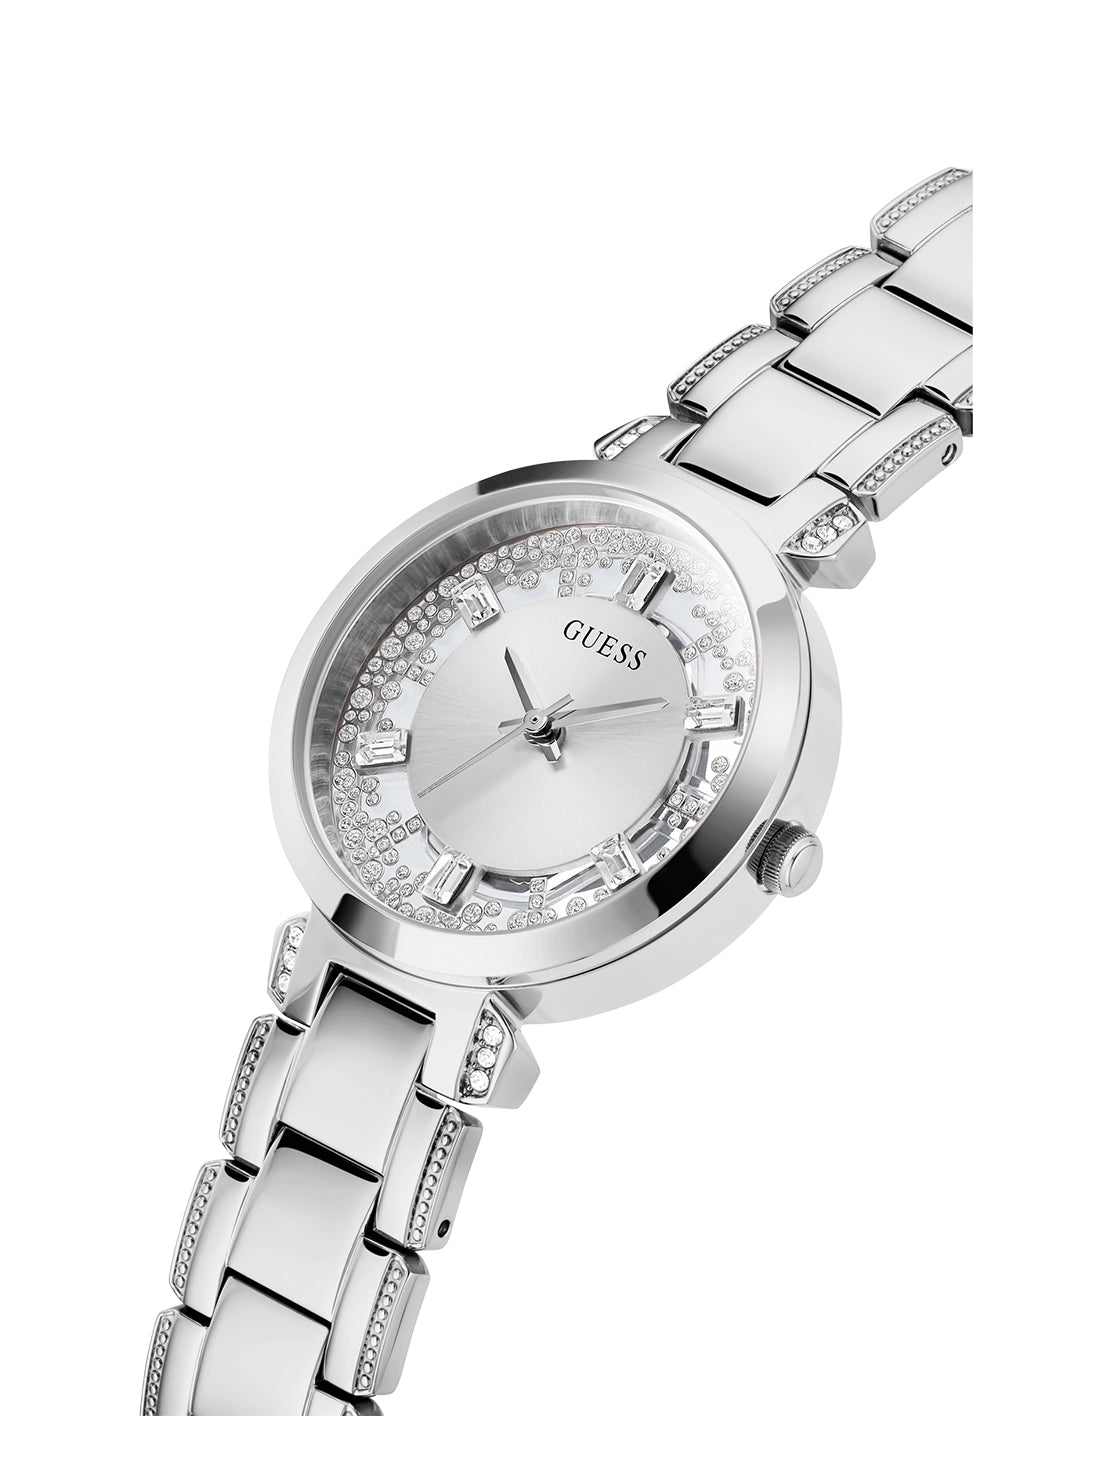 GUESS Women's Silver Crystal Clear Glitz Watch GW0470L1 Angle View